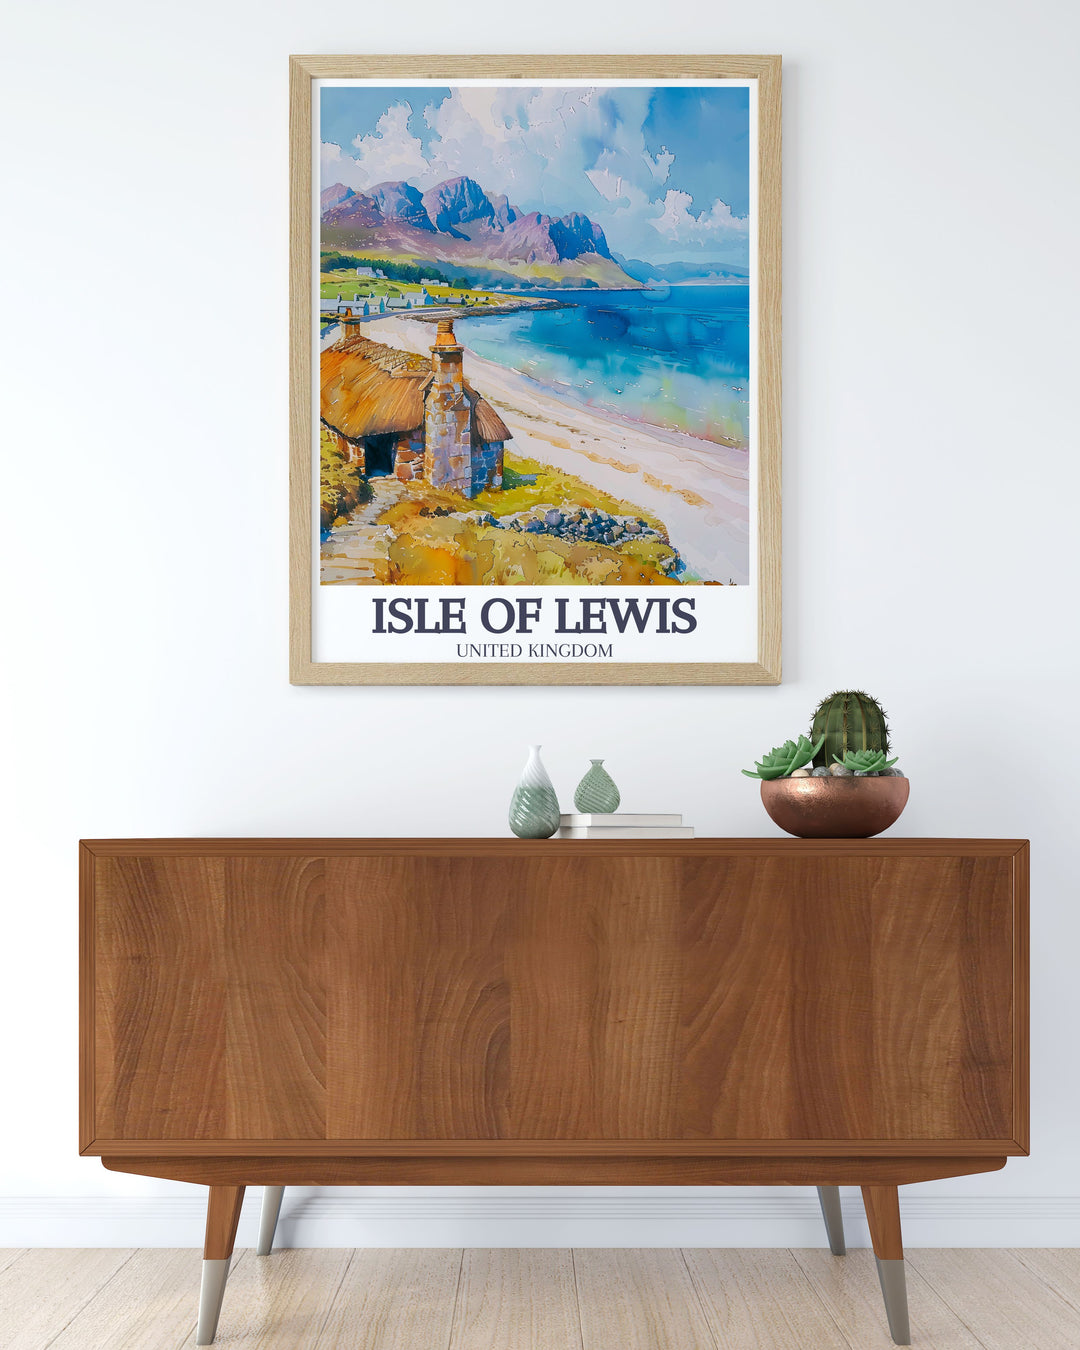 Gallery wall art of Dalbeg Beach, showcasing the peaceful ambiance and untouched beauty of this secluded spot on the Isle of Lewis, bringing a sense of calm and natural splendor to any room.